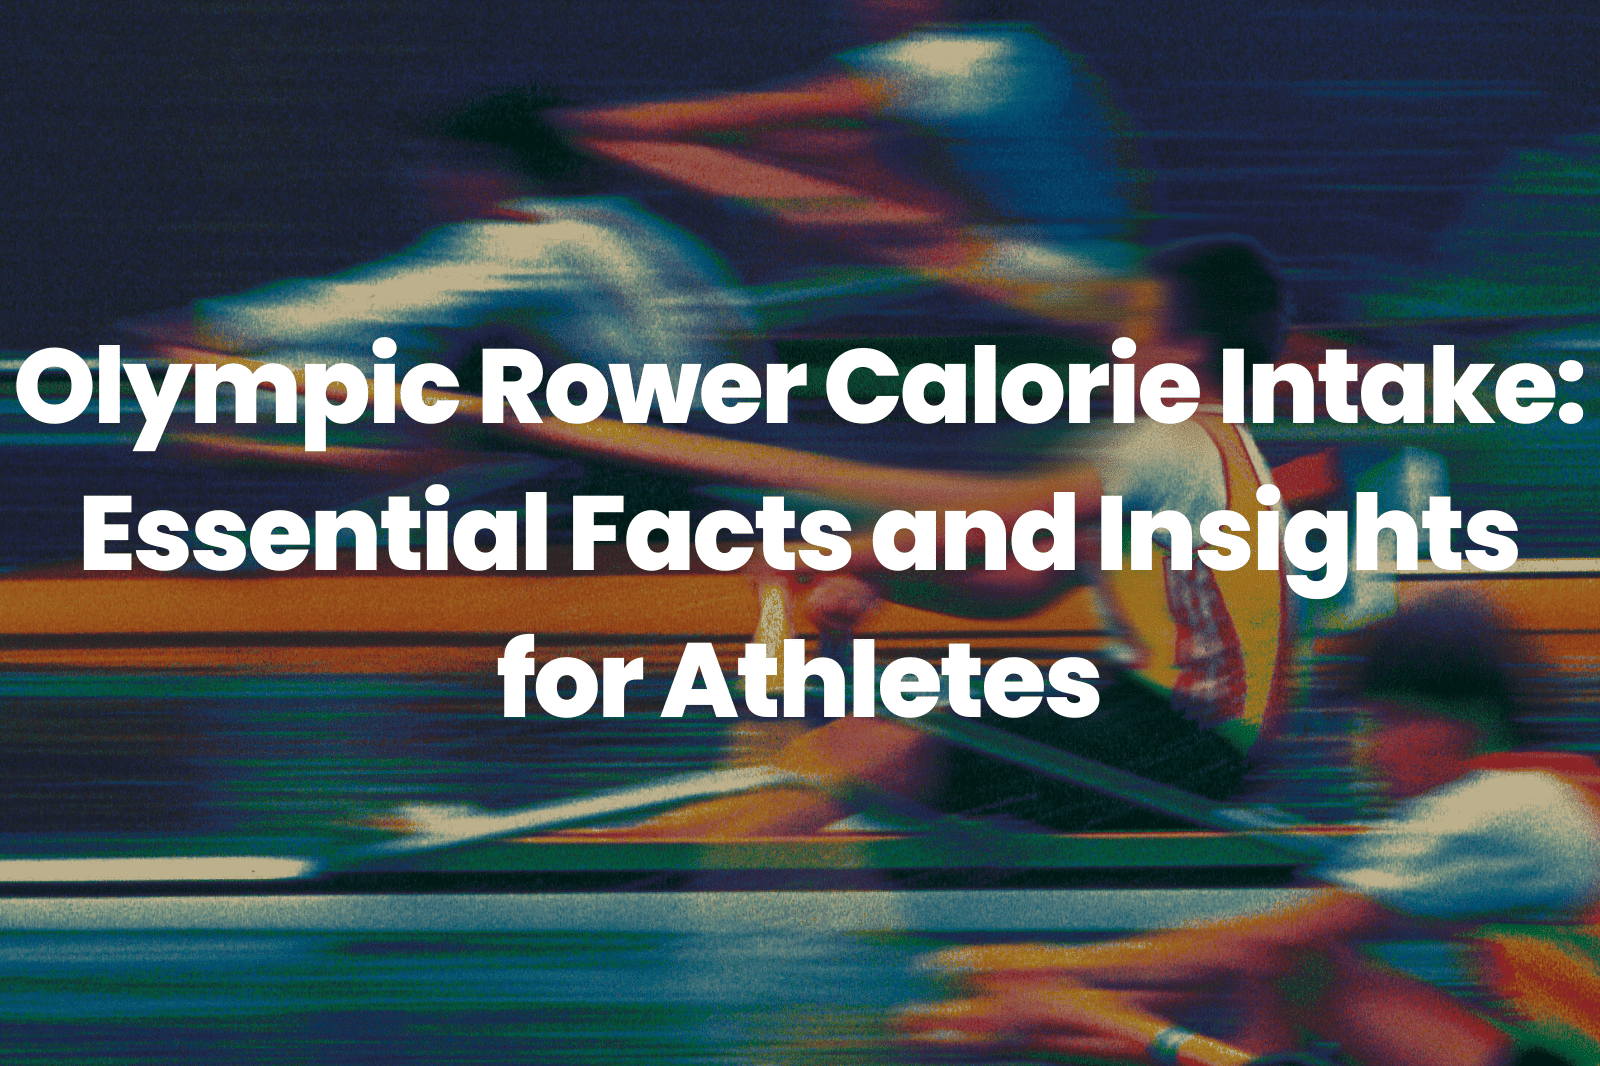 Olympic Rower Calorie Intake